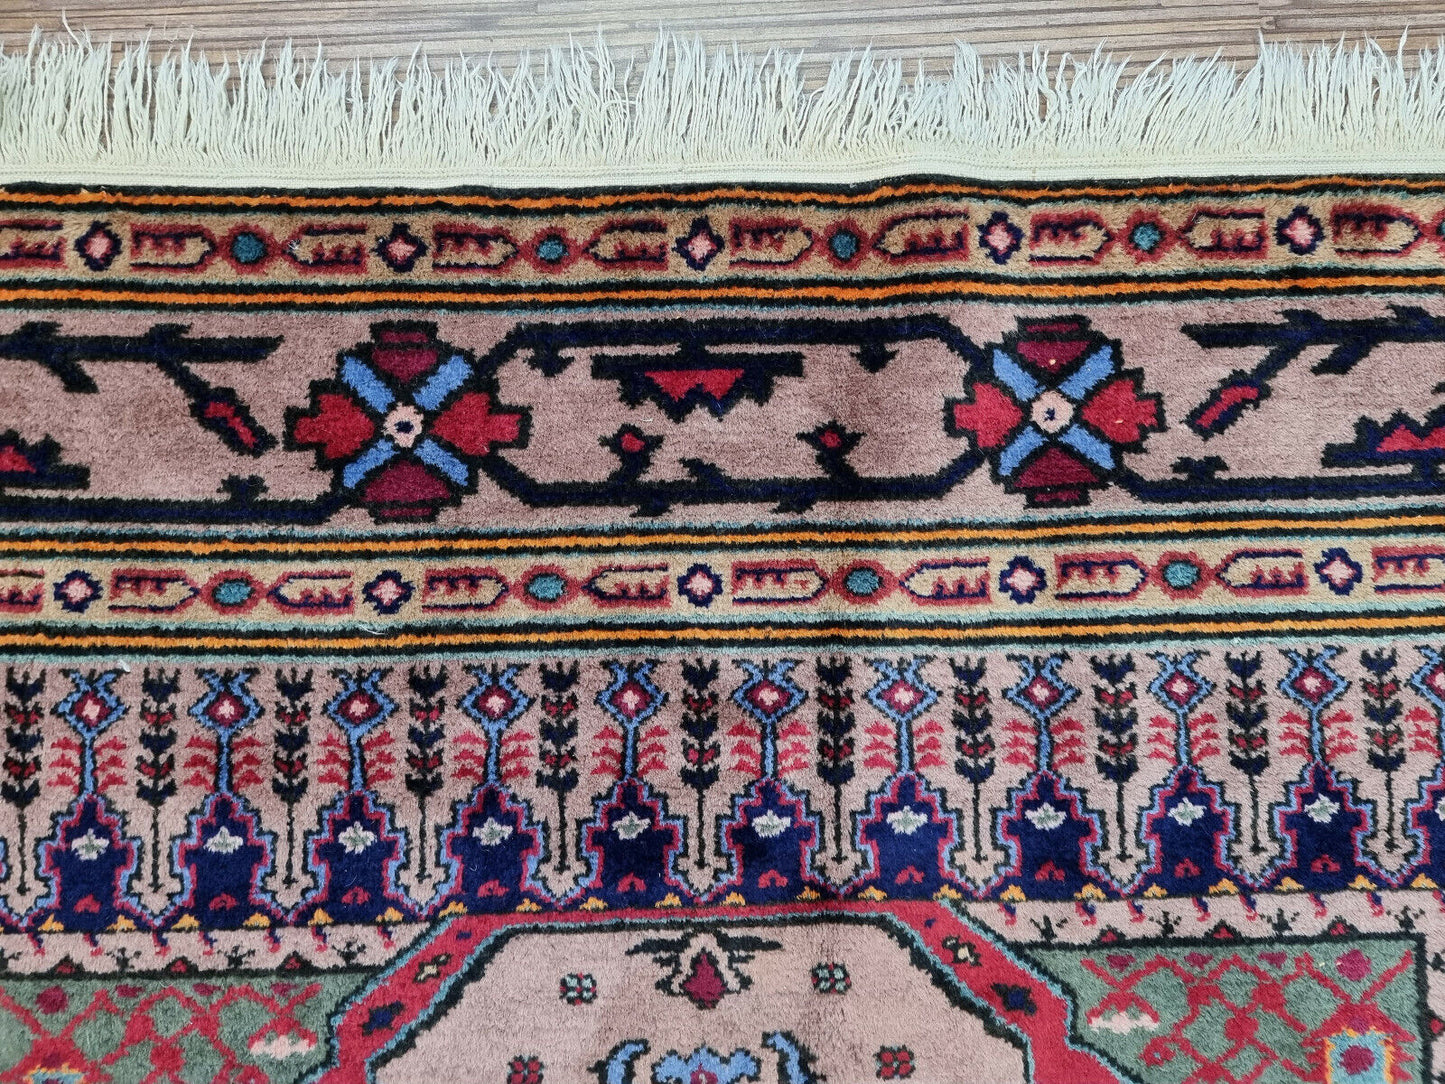 Close-up of wool texture on Handmade Vintage Caucasian Shirvan Rug - Detailed view highlighting the wool texture known for its durability and comfort.